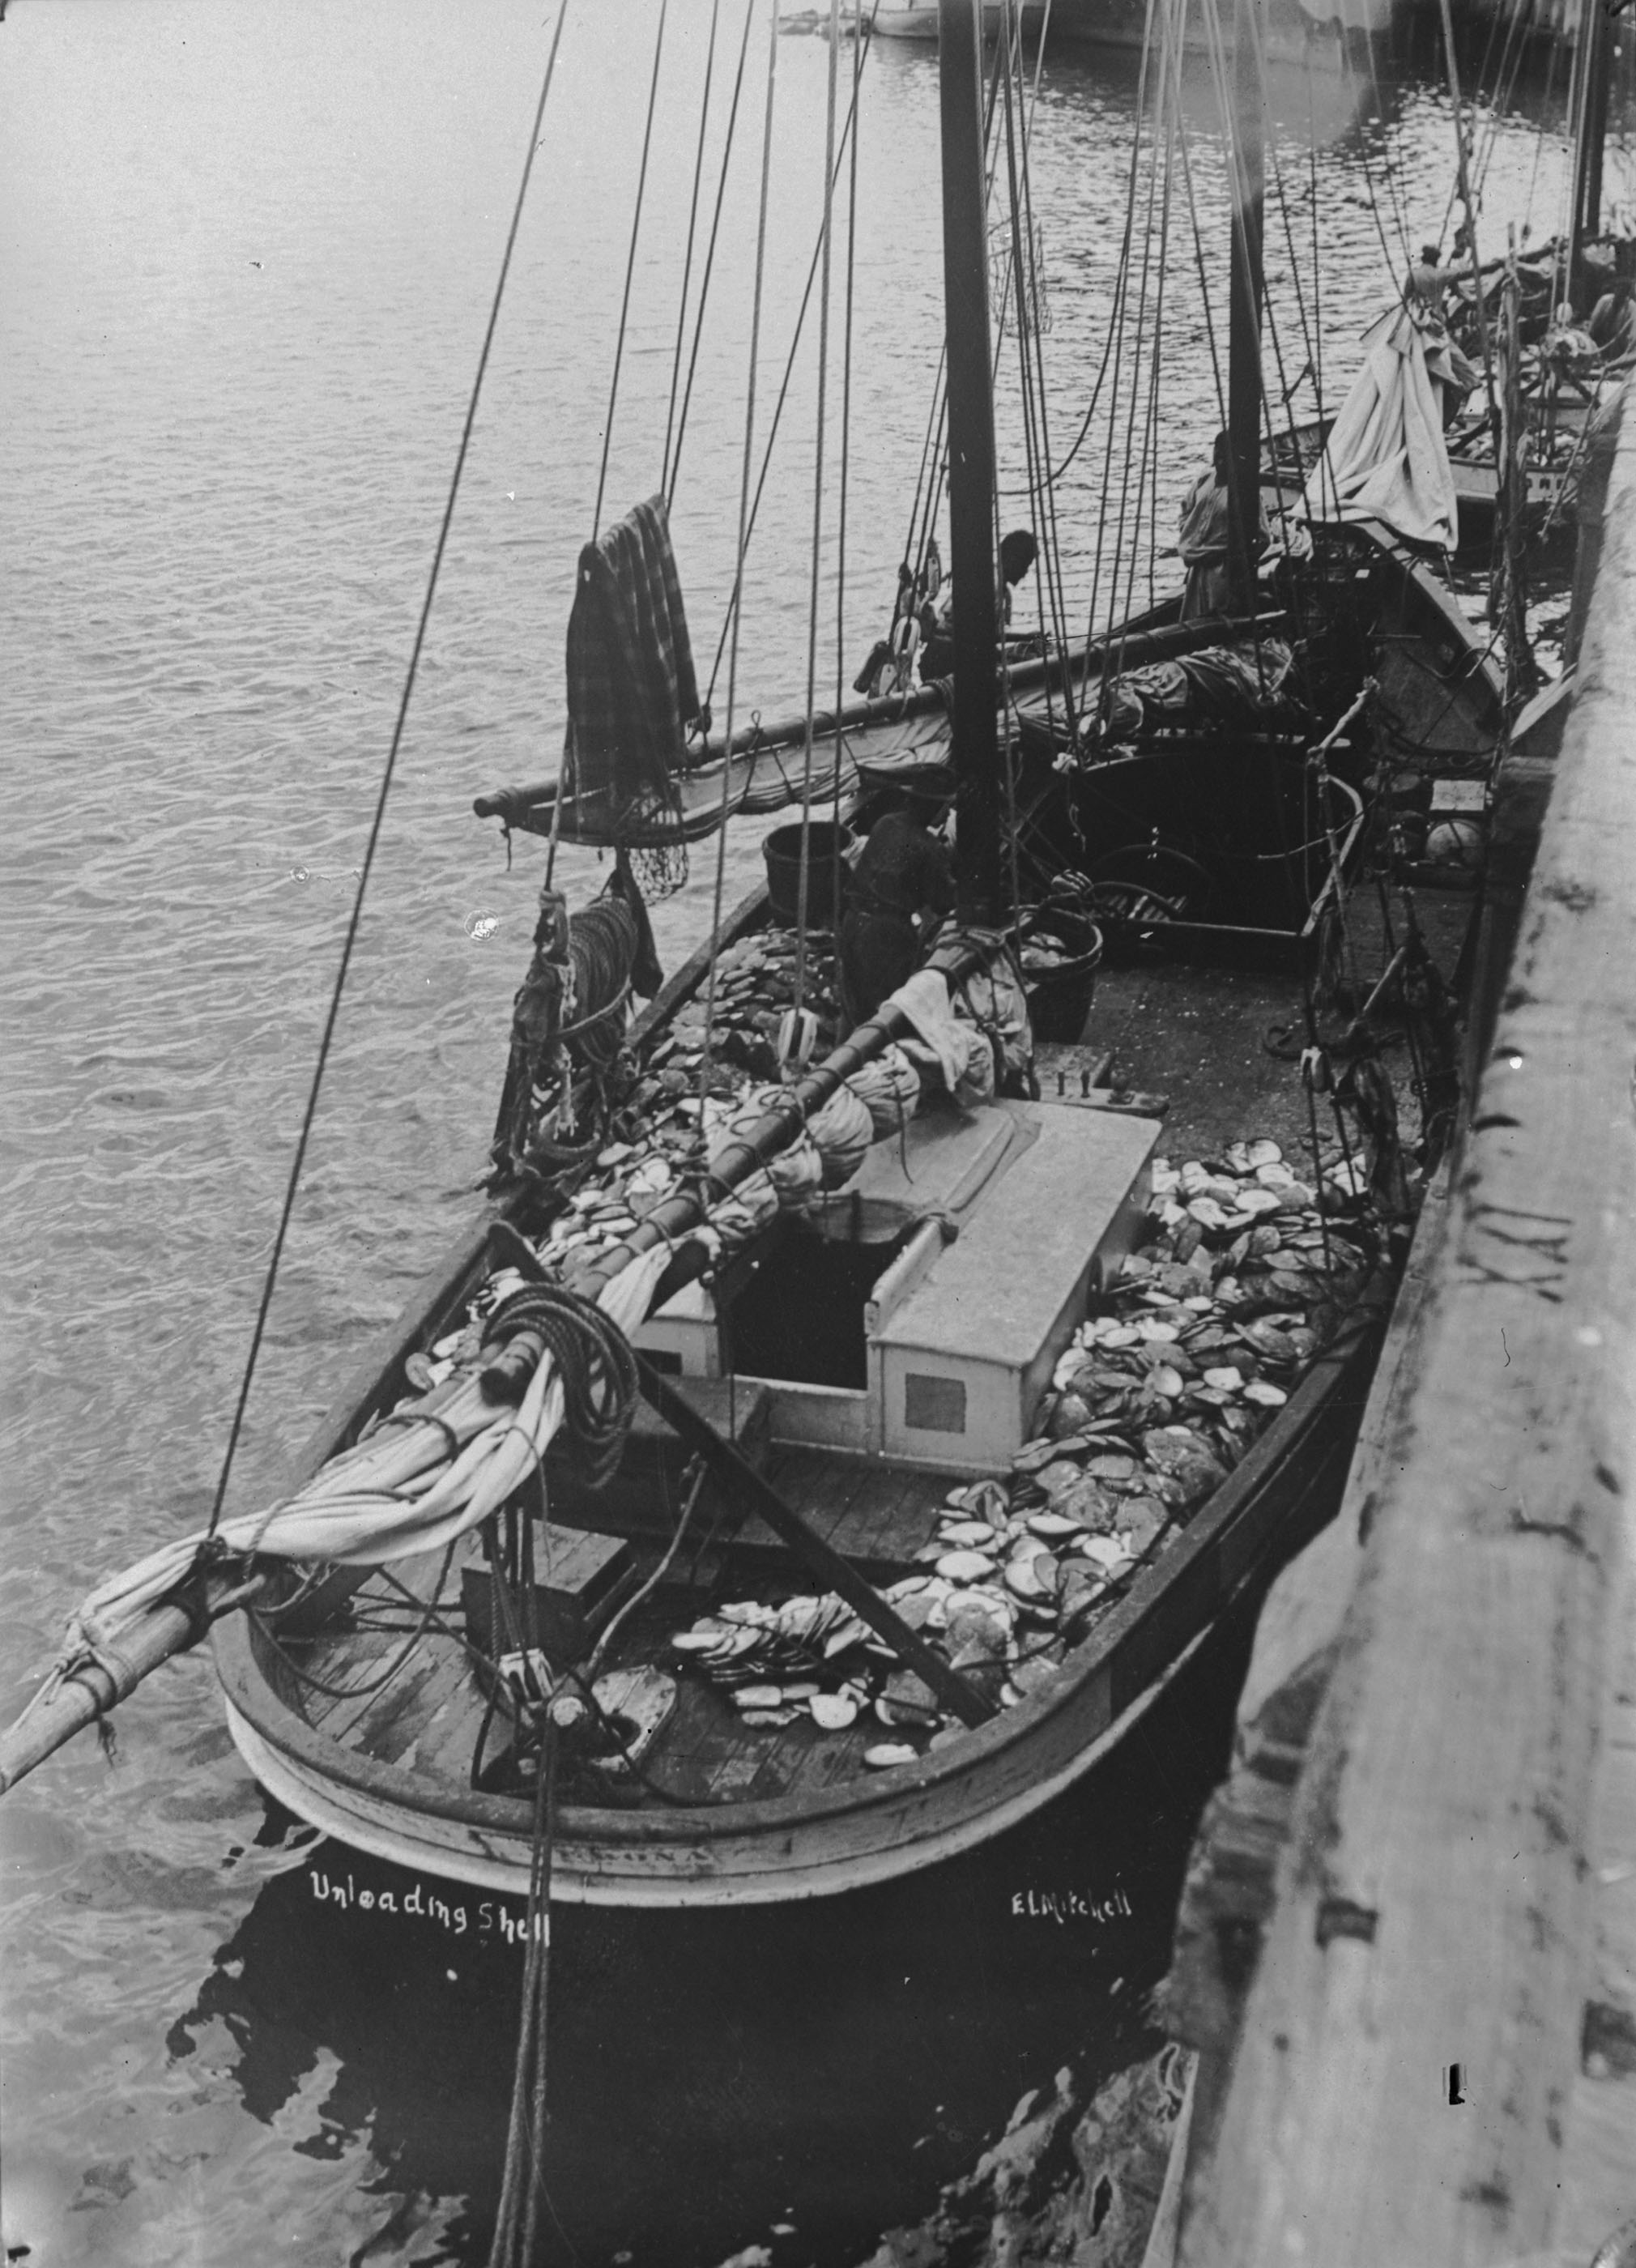 Unloading pearl shell from a lugger, 1910
